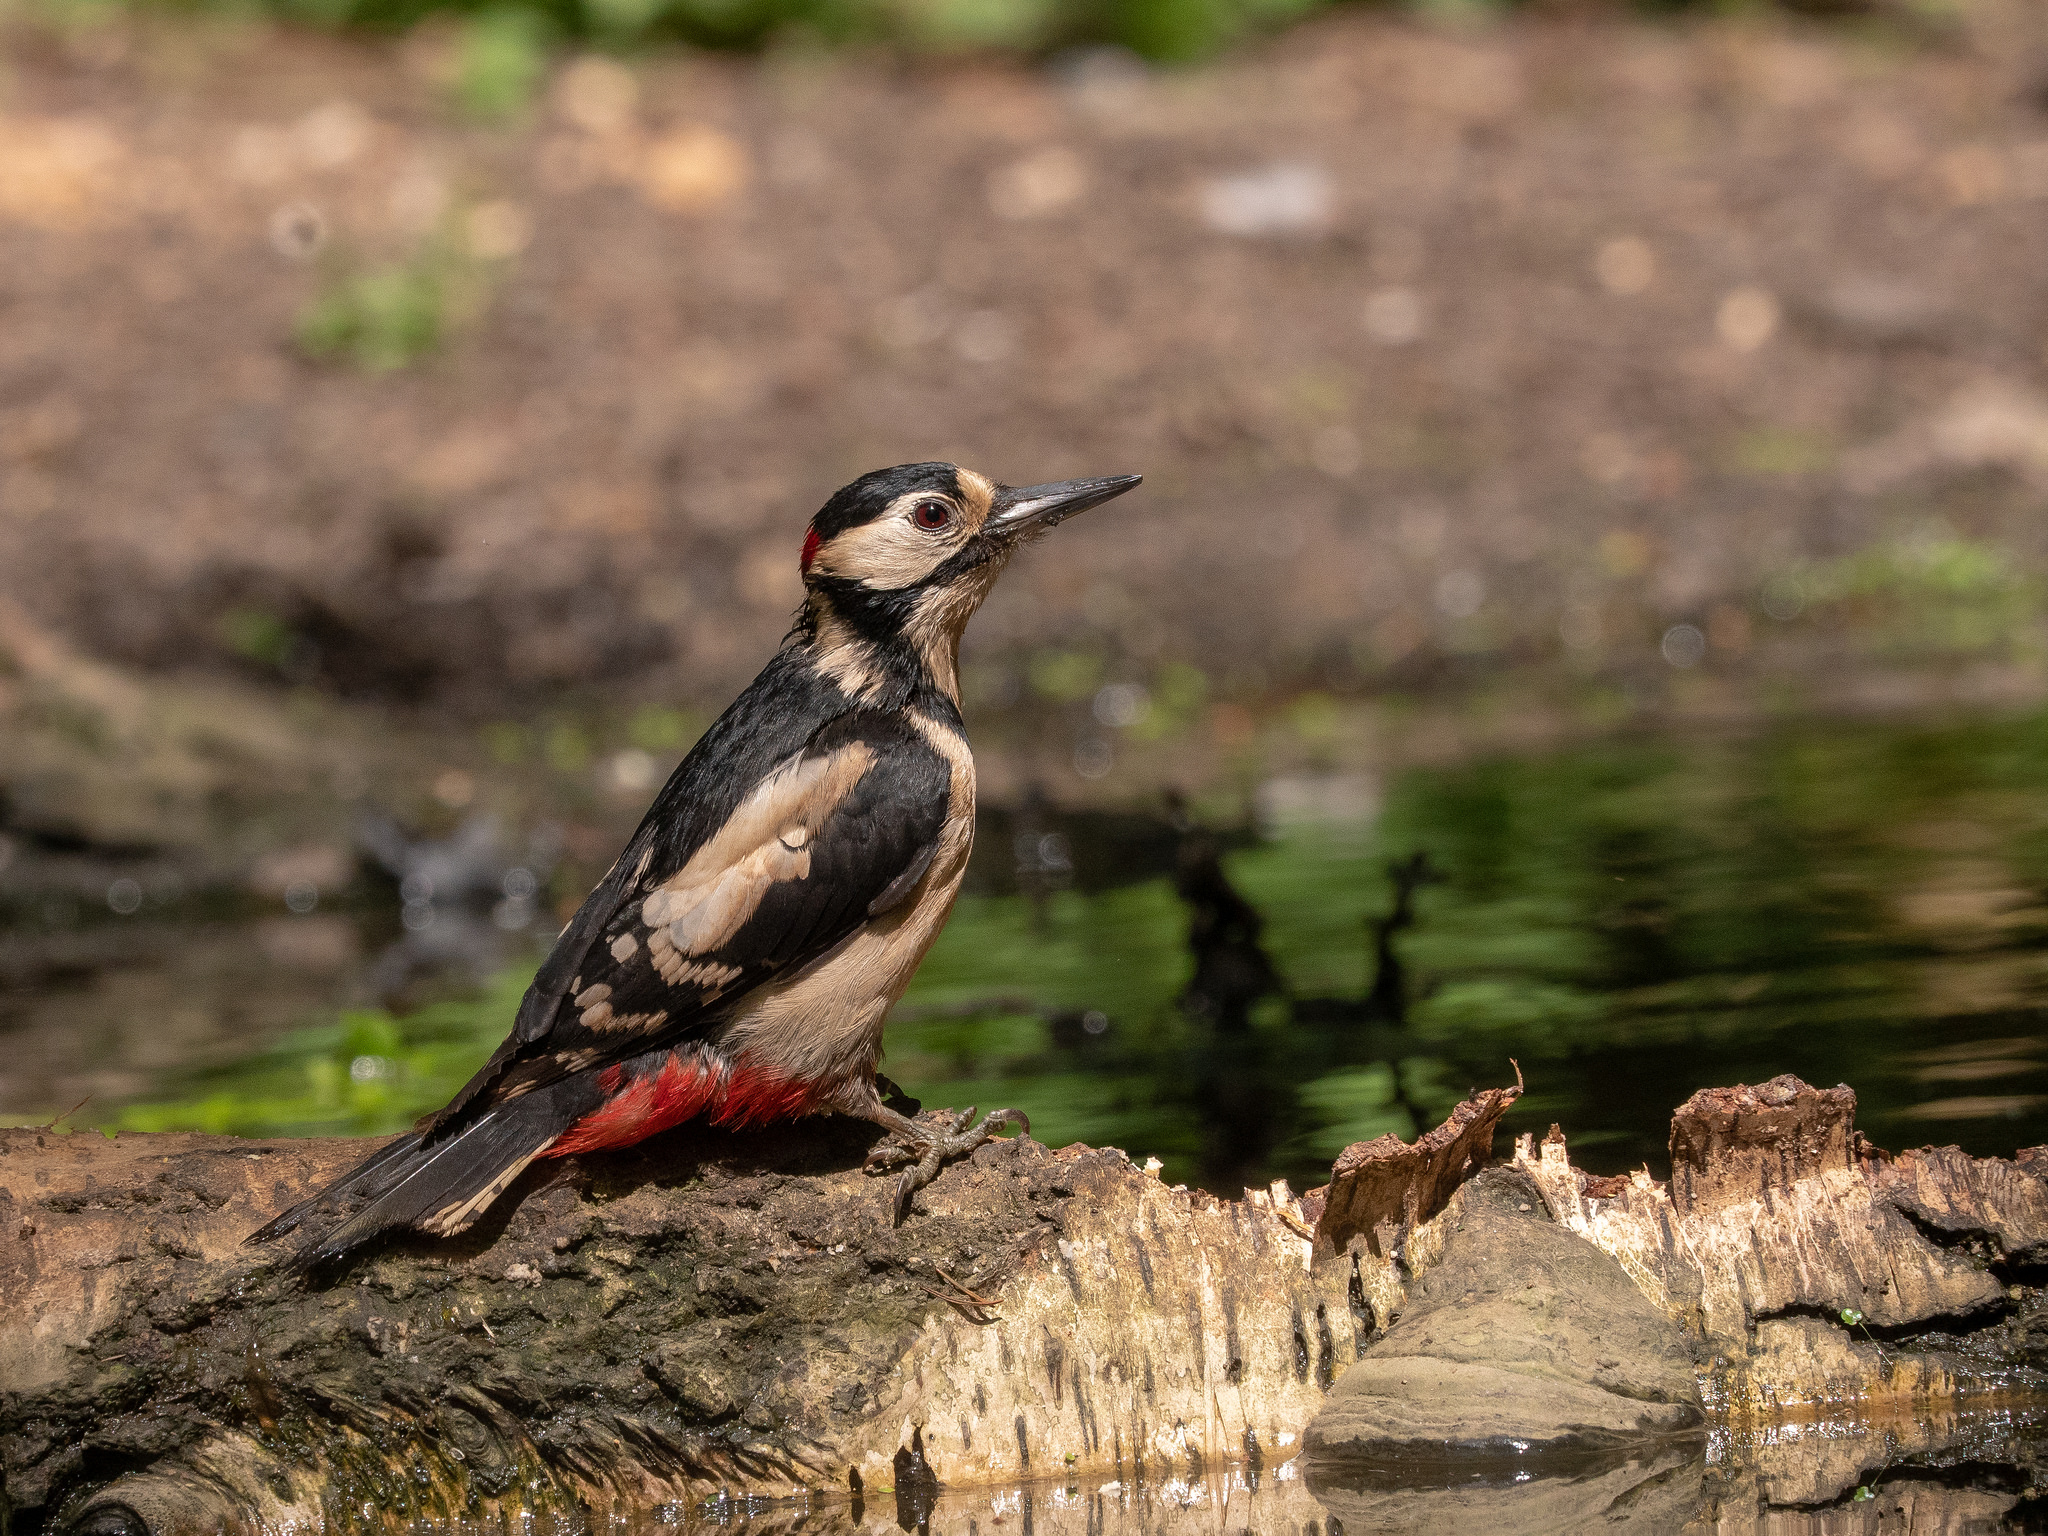 Bird Songs & Calls, National Trust Felbrigg | Identifying birds by their songs and calls is a great skill to have, is less tricky than you might think and adds a whole new dimension to being outdoors.  | Walking, guided, wildlife, birds